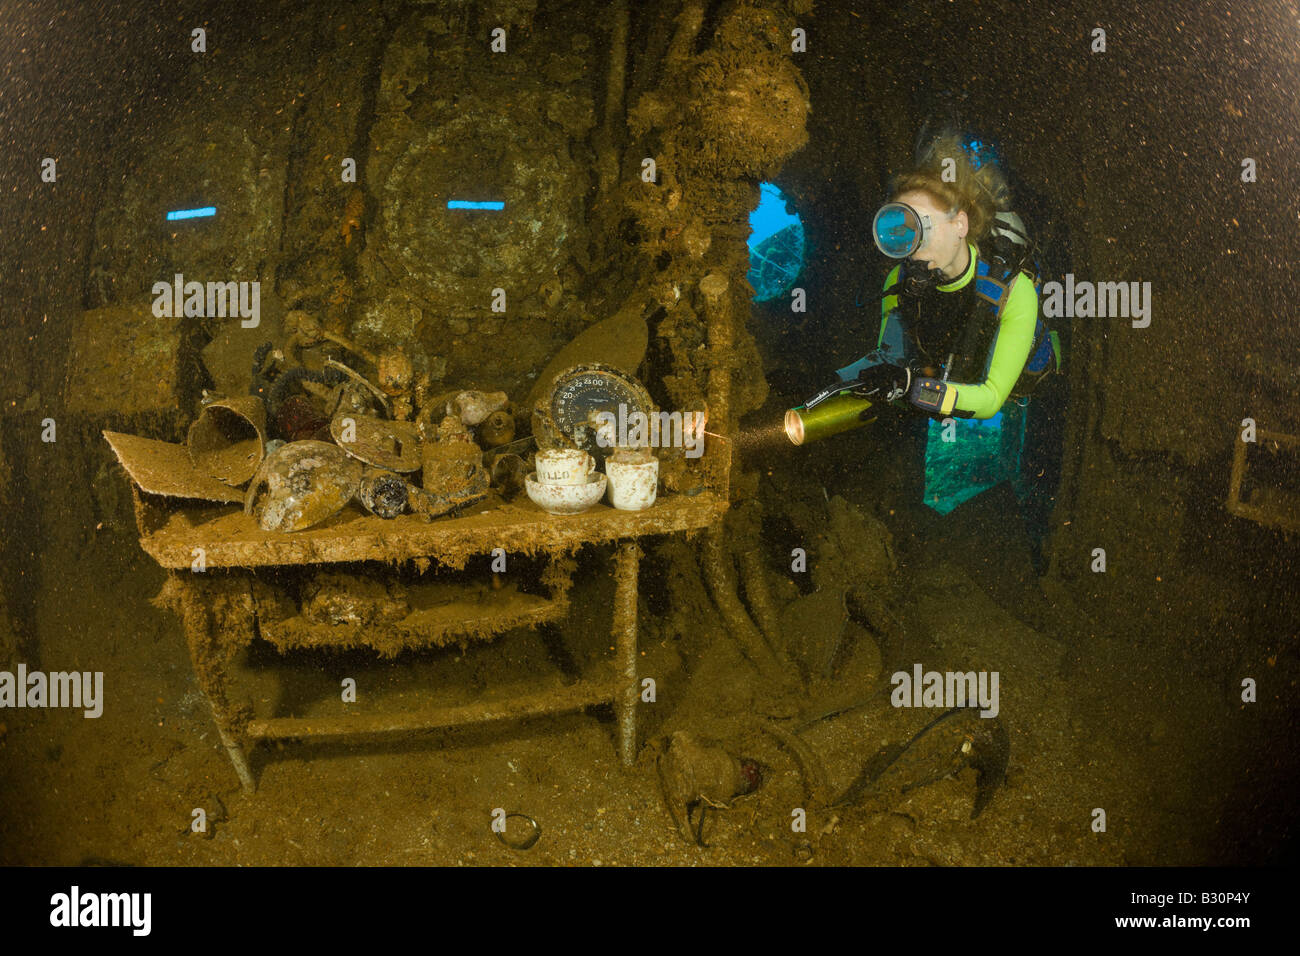 Diver finds Tableware and Artifacts on Brigde of USS Saratoga Marshall Islands Bikini Atoll Micronesia Pacific Ocean Stock Photo